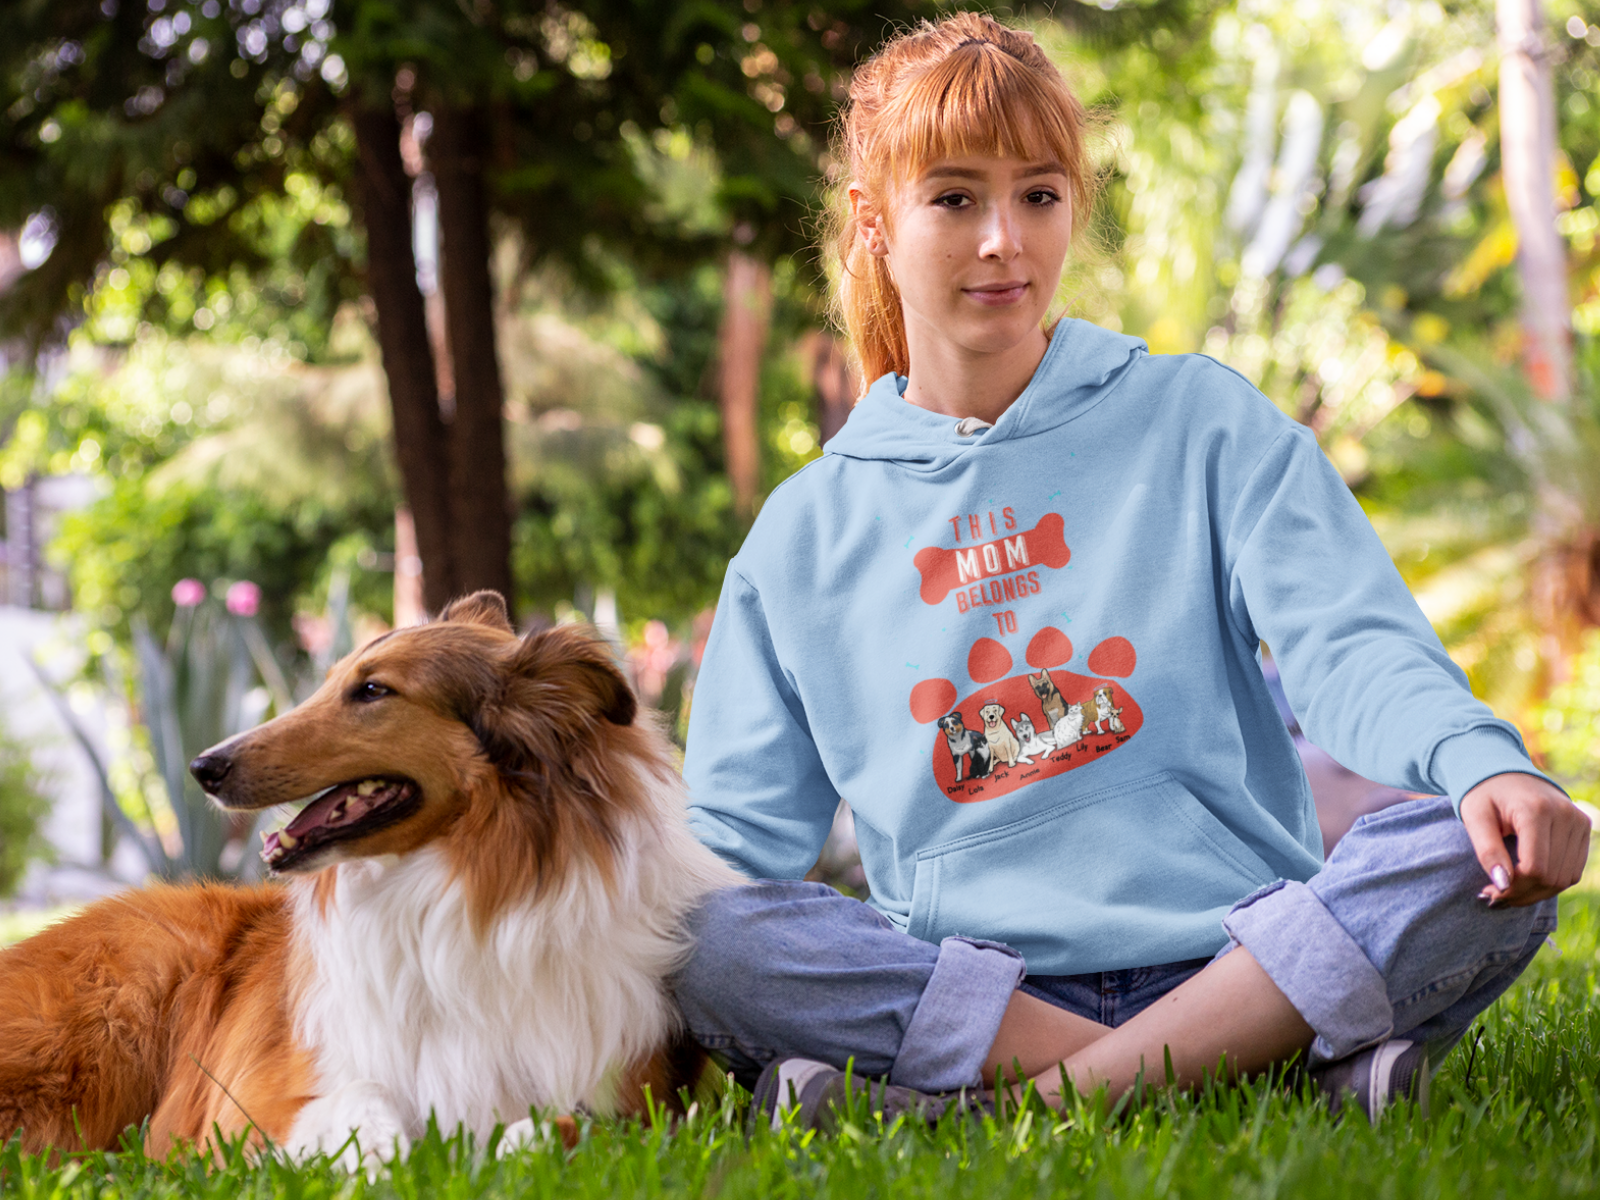 This Mom Belongs To Customized Hoodies For Dog Mom